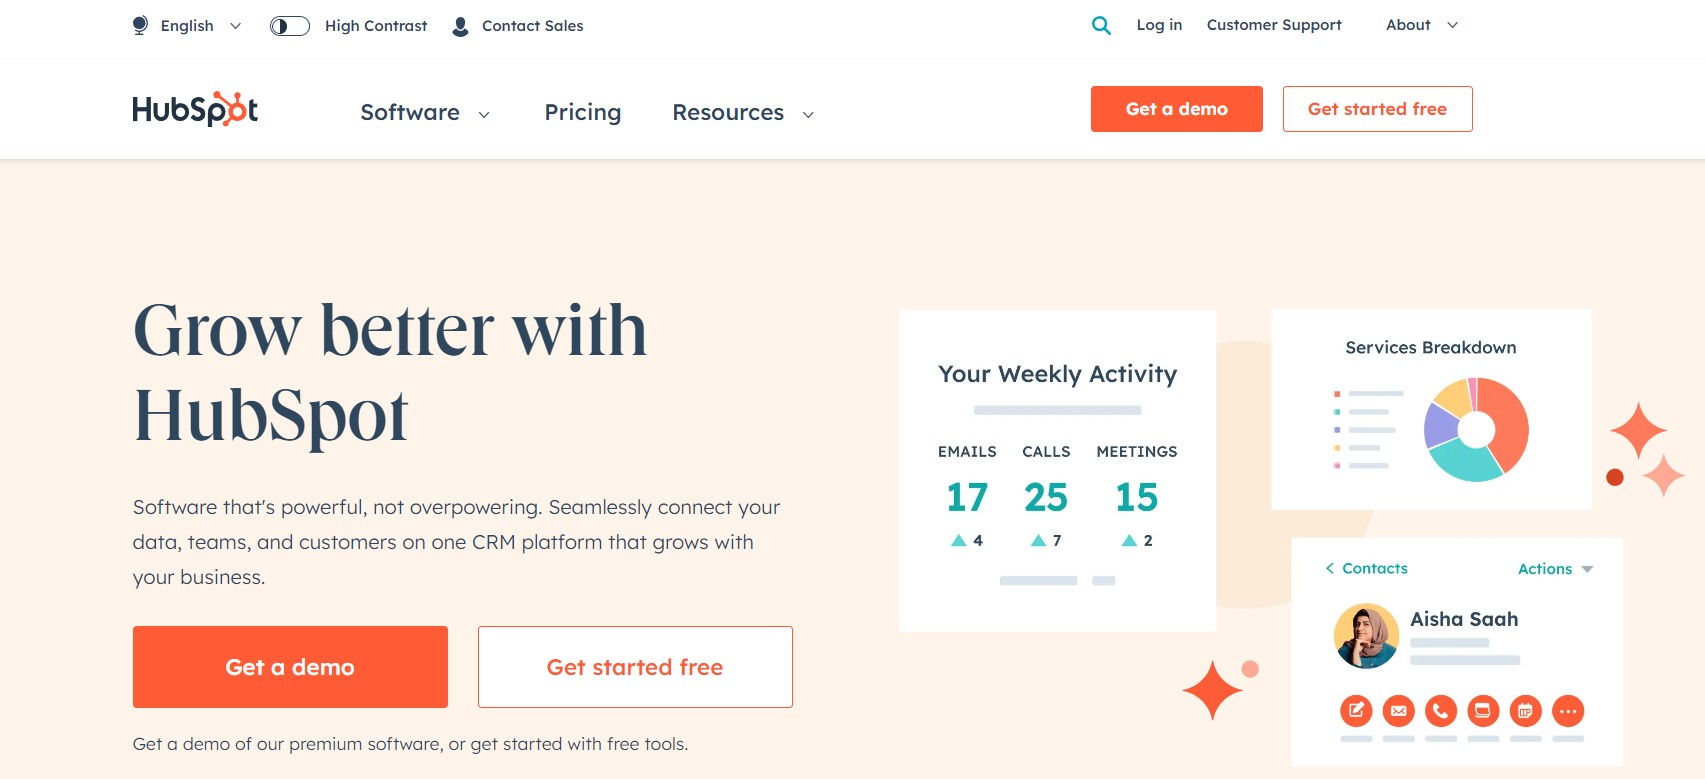 Hubspot tool for bloggers